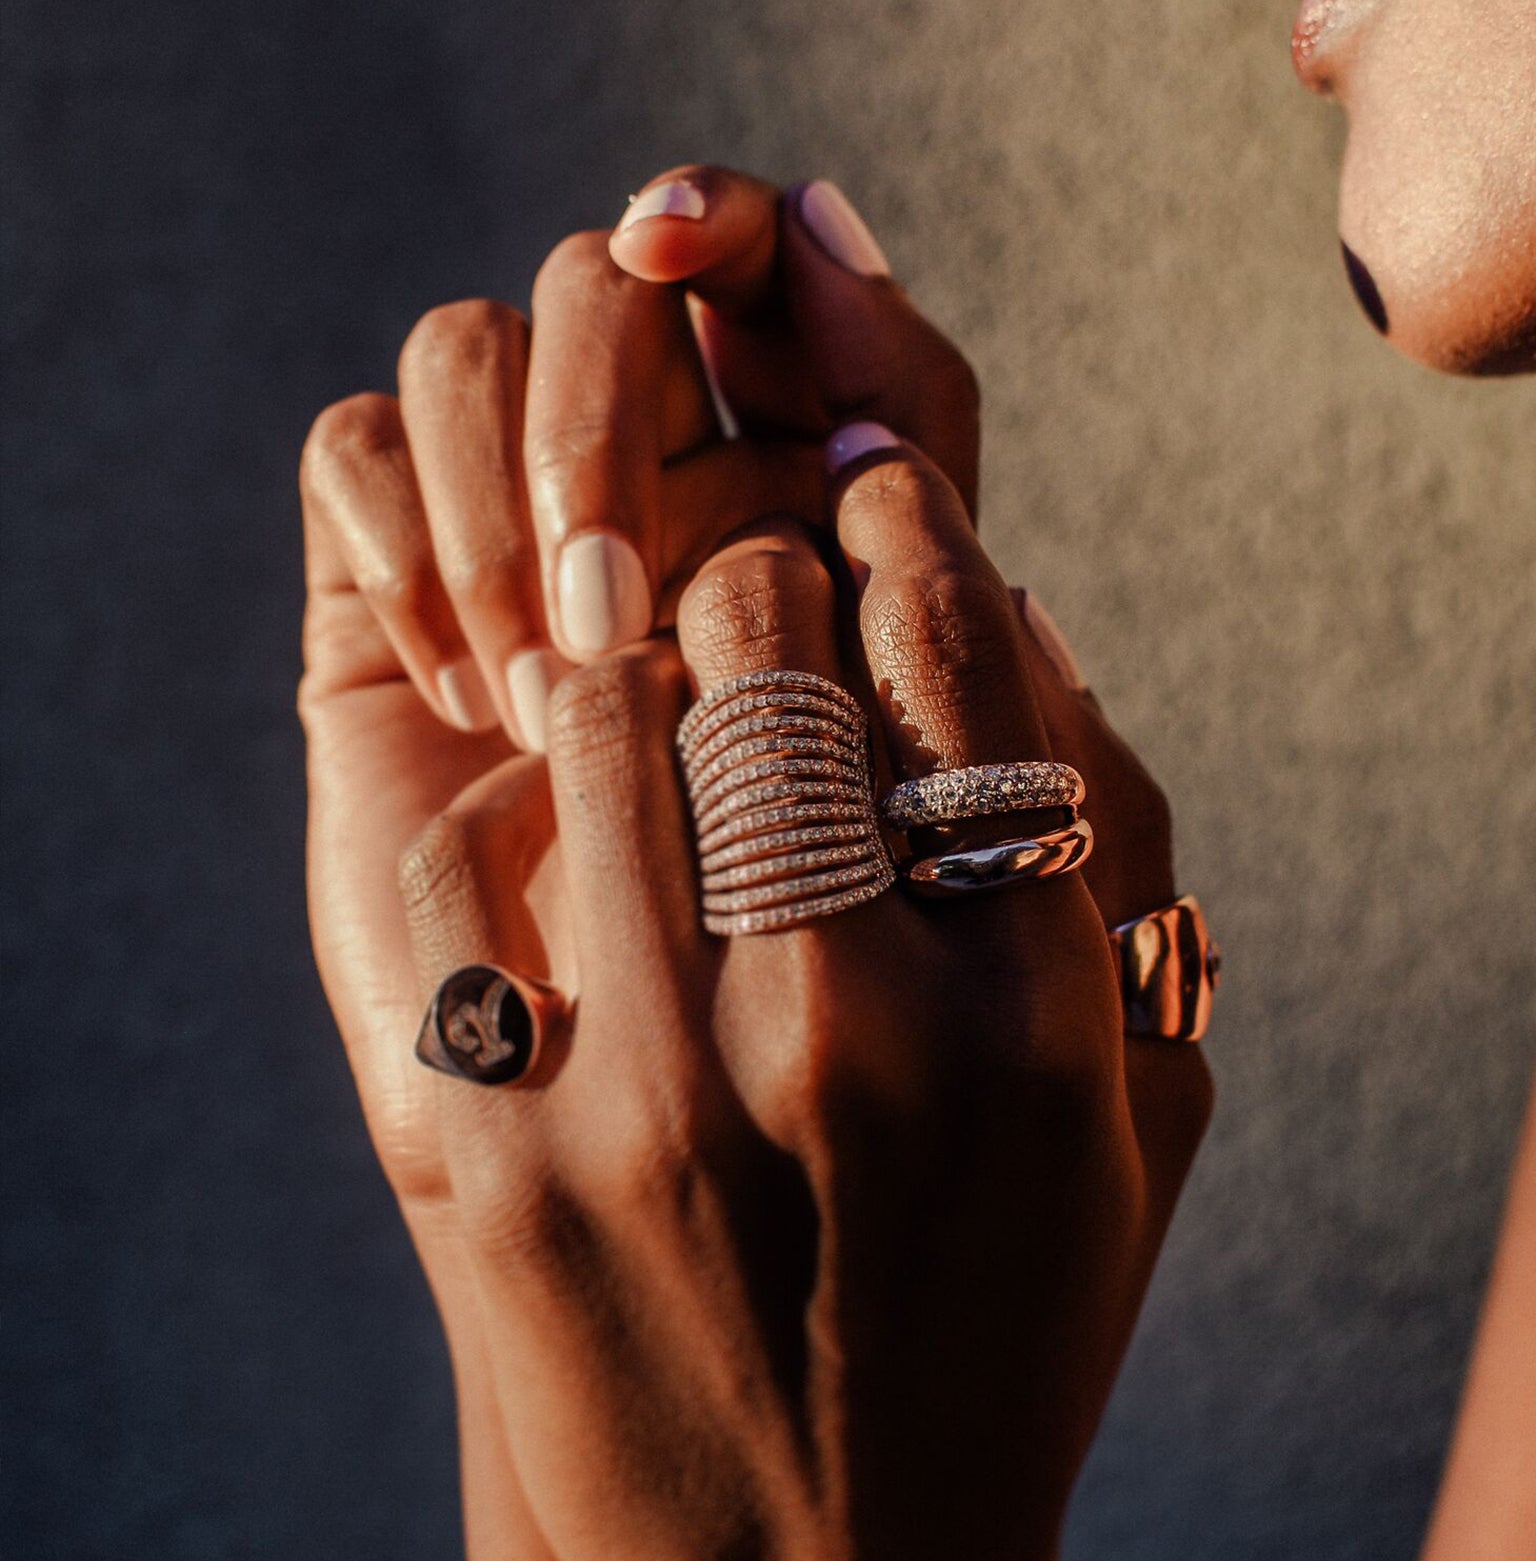 The Gemini Ring shown paired with the Spine Ring and Mini Chilla Ring.